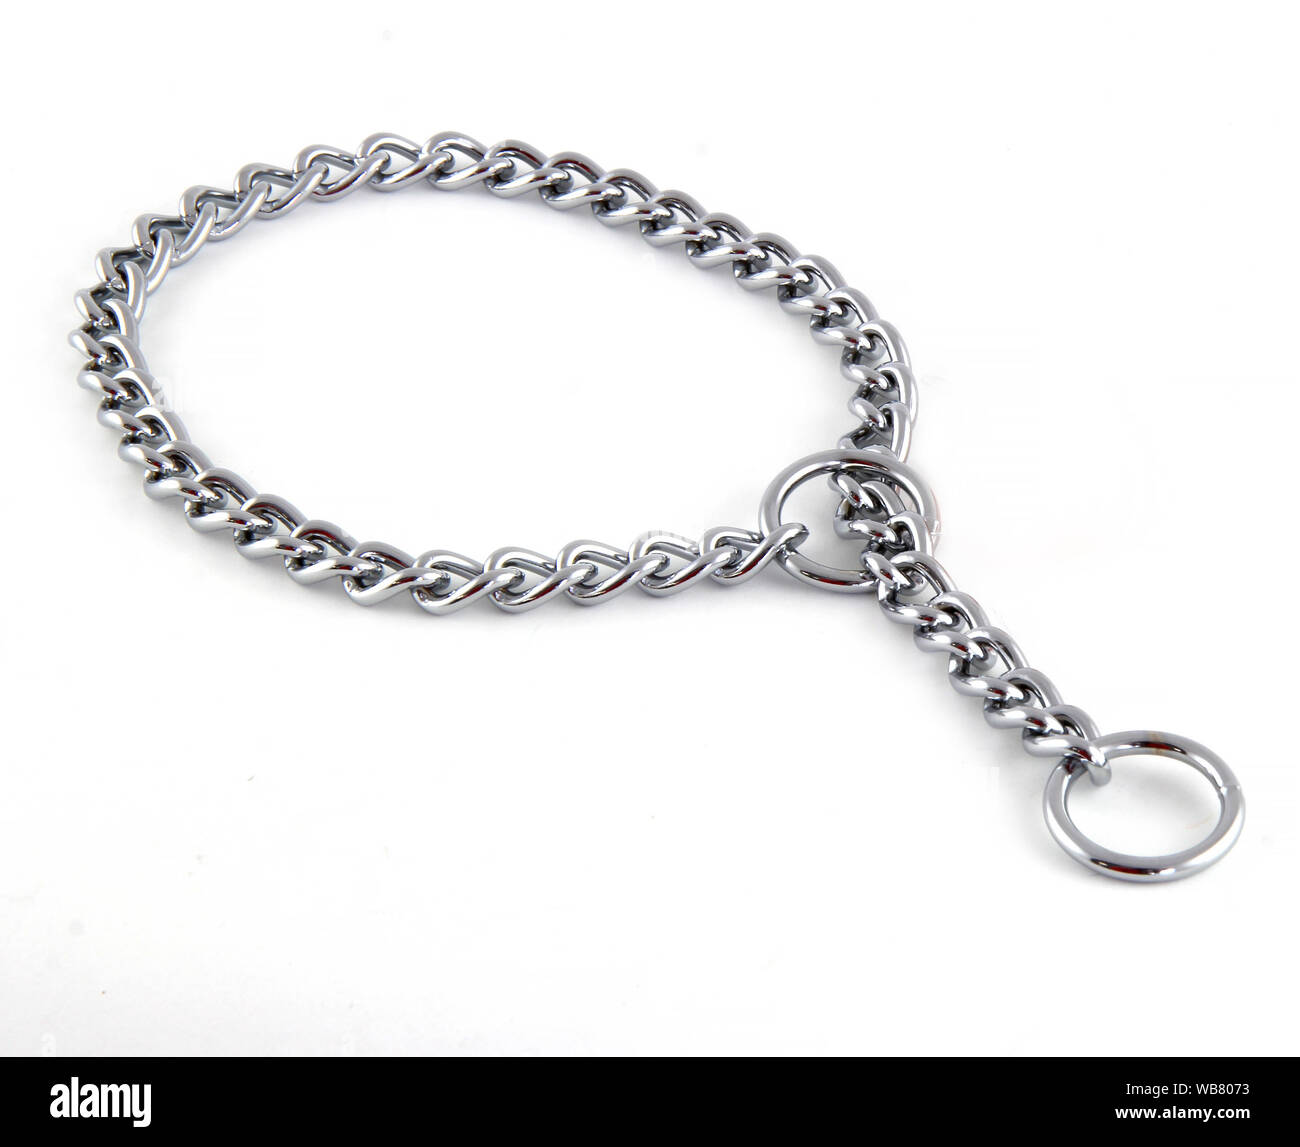 Iron chain collar isolated on white background. It is a training collar for dogs. Stock Photo